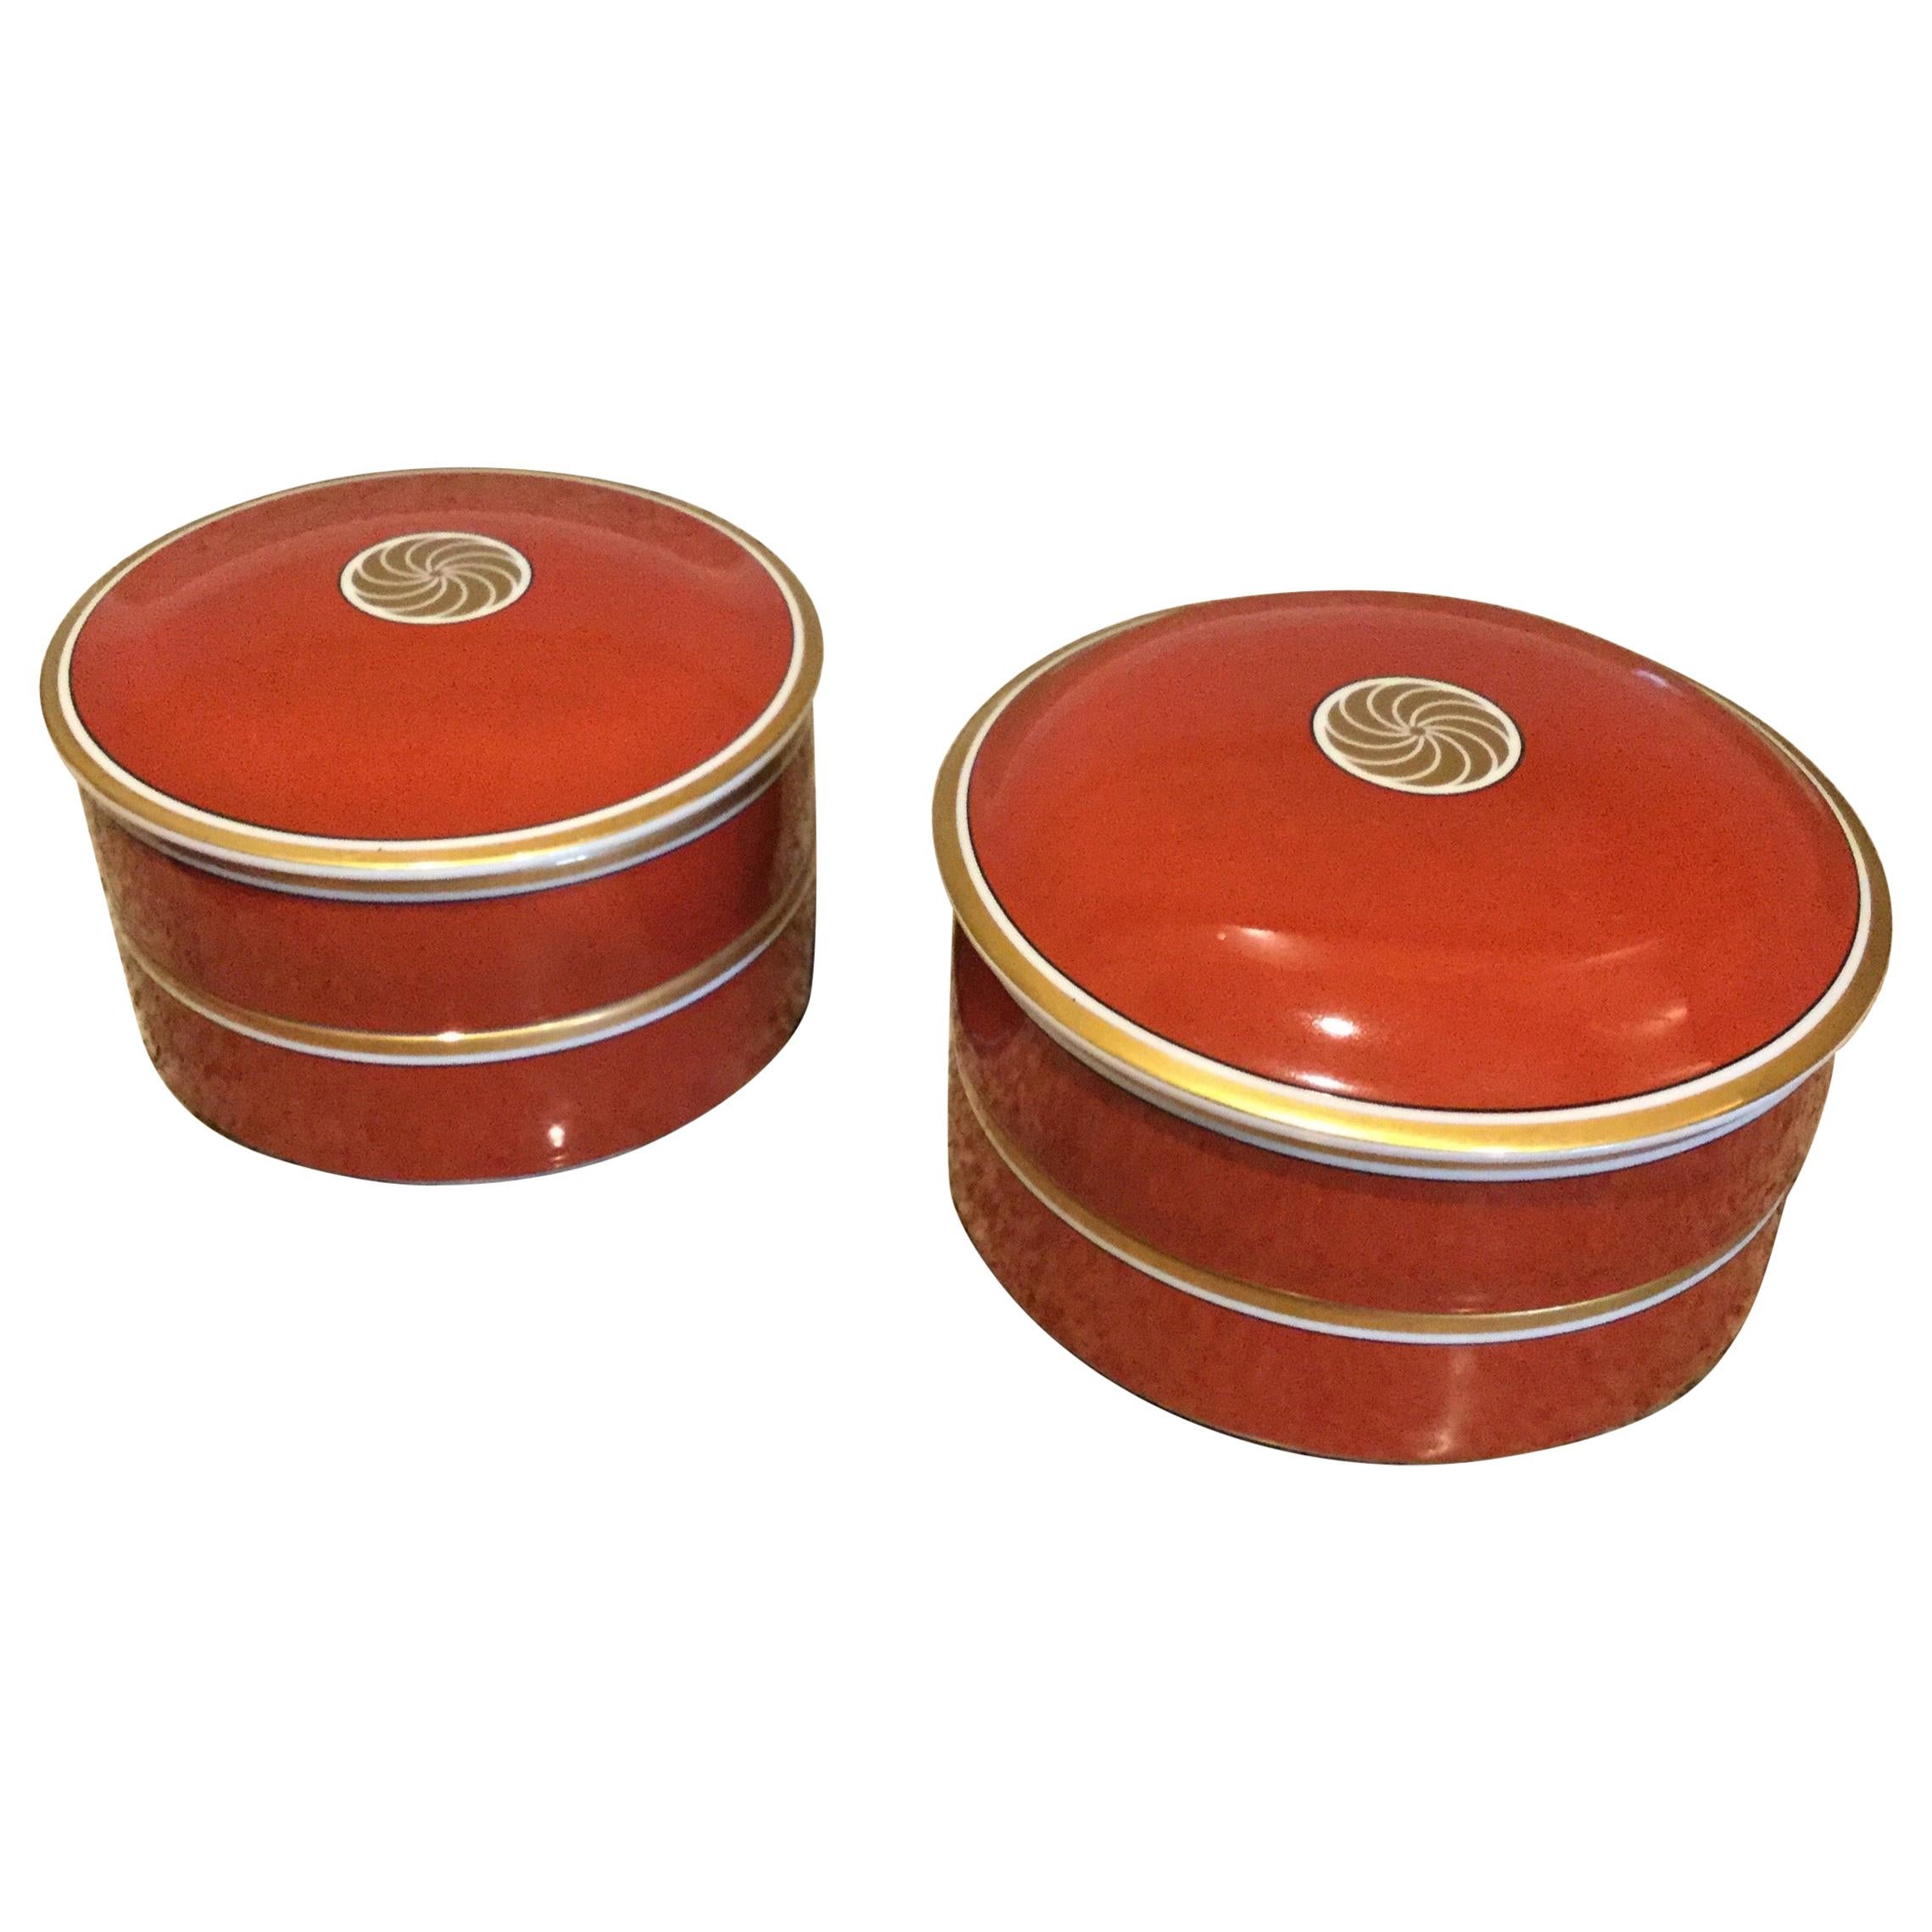 Fitz and Floyd Medaillon d’Or Coffee Pair Double Stack Serving Bowls/Lids, 1979